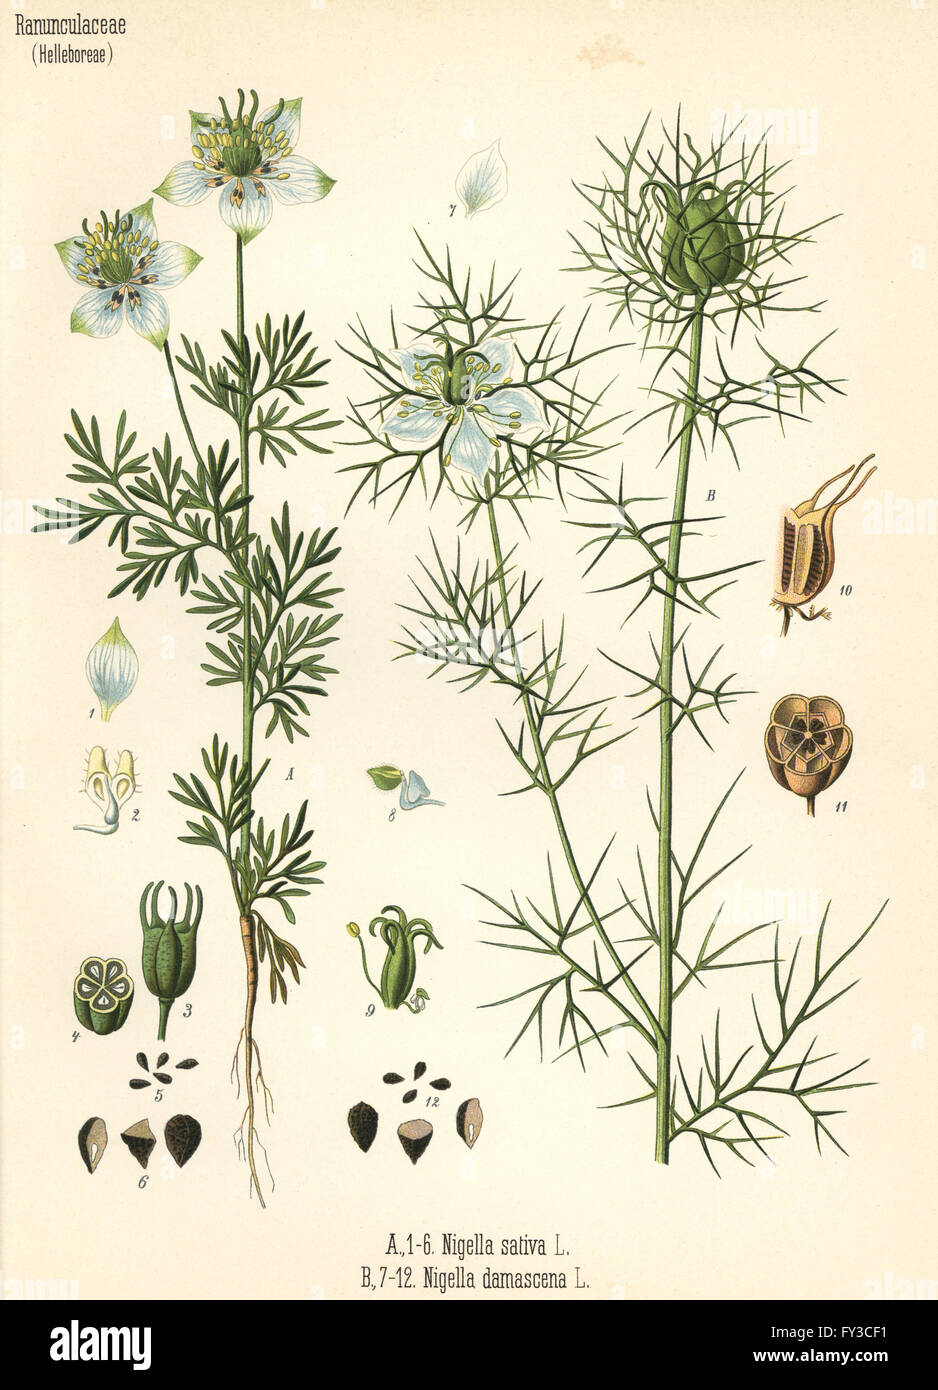 Black cumin, Nigella sativa, and love-in-a-mist, Nigella damascena. Chromolithograph after a botanical illustration from Hermann Adolph Koehler's Medicinal Plants, edited by Gustav Pabst, Koehler, Germany, 1887. Stock Photo